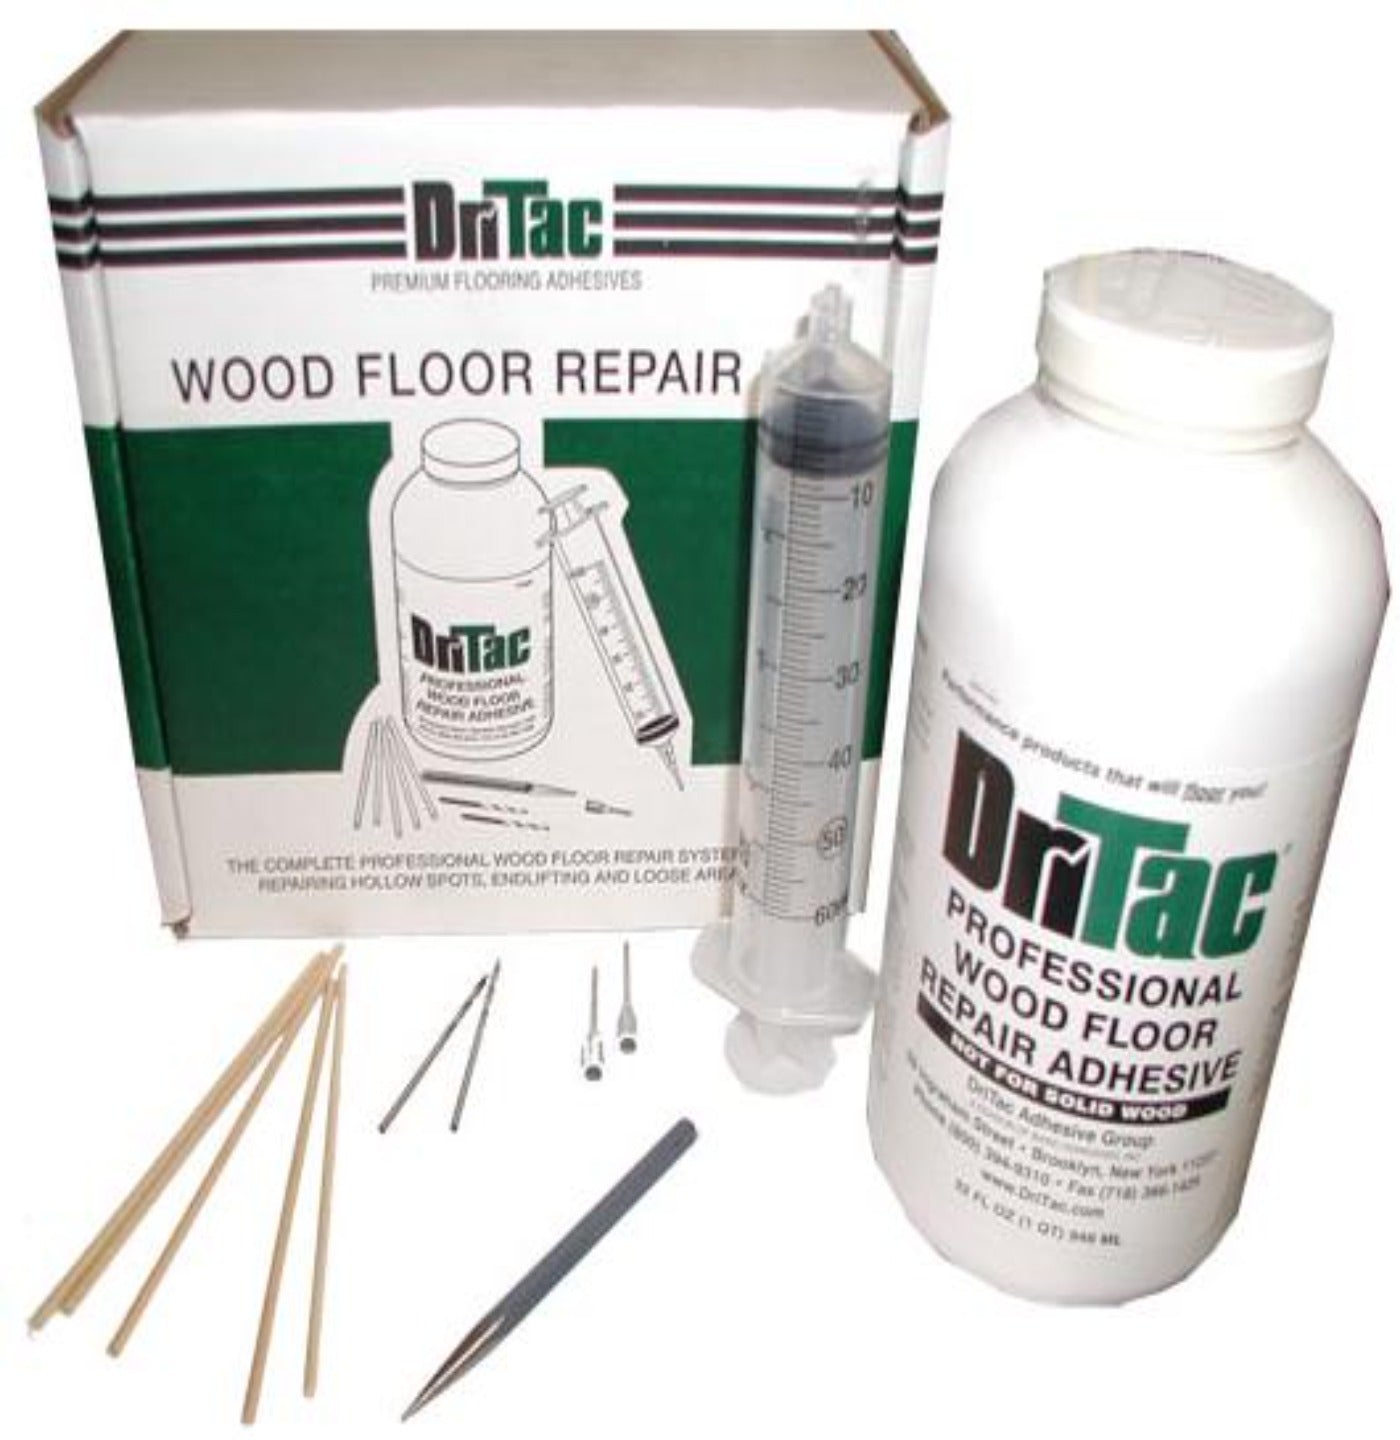 Fix-A-Floor All in One Micro Precision Injector Kit For Fast Repair of  Loose/Hollow & Creaky Tiles, Wood, LVT & Laminate flooring